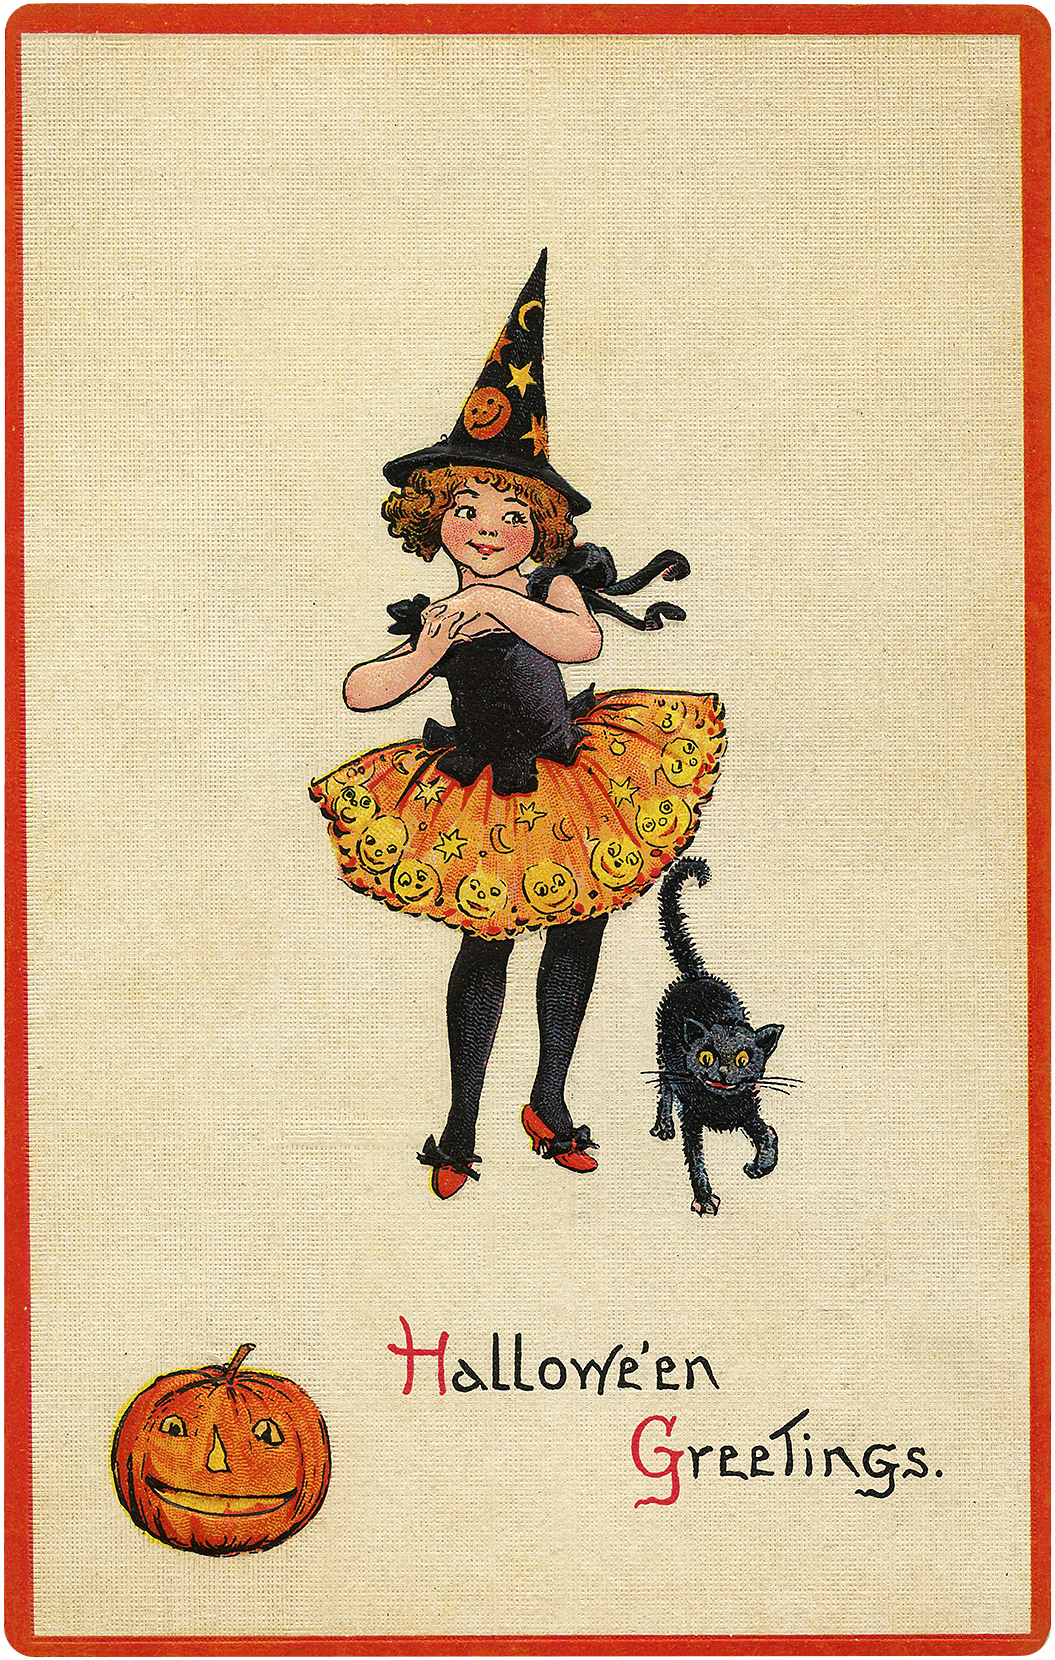 cutest-vintage-witch-costume-halloween-postcard-the-graphics-fairy